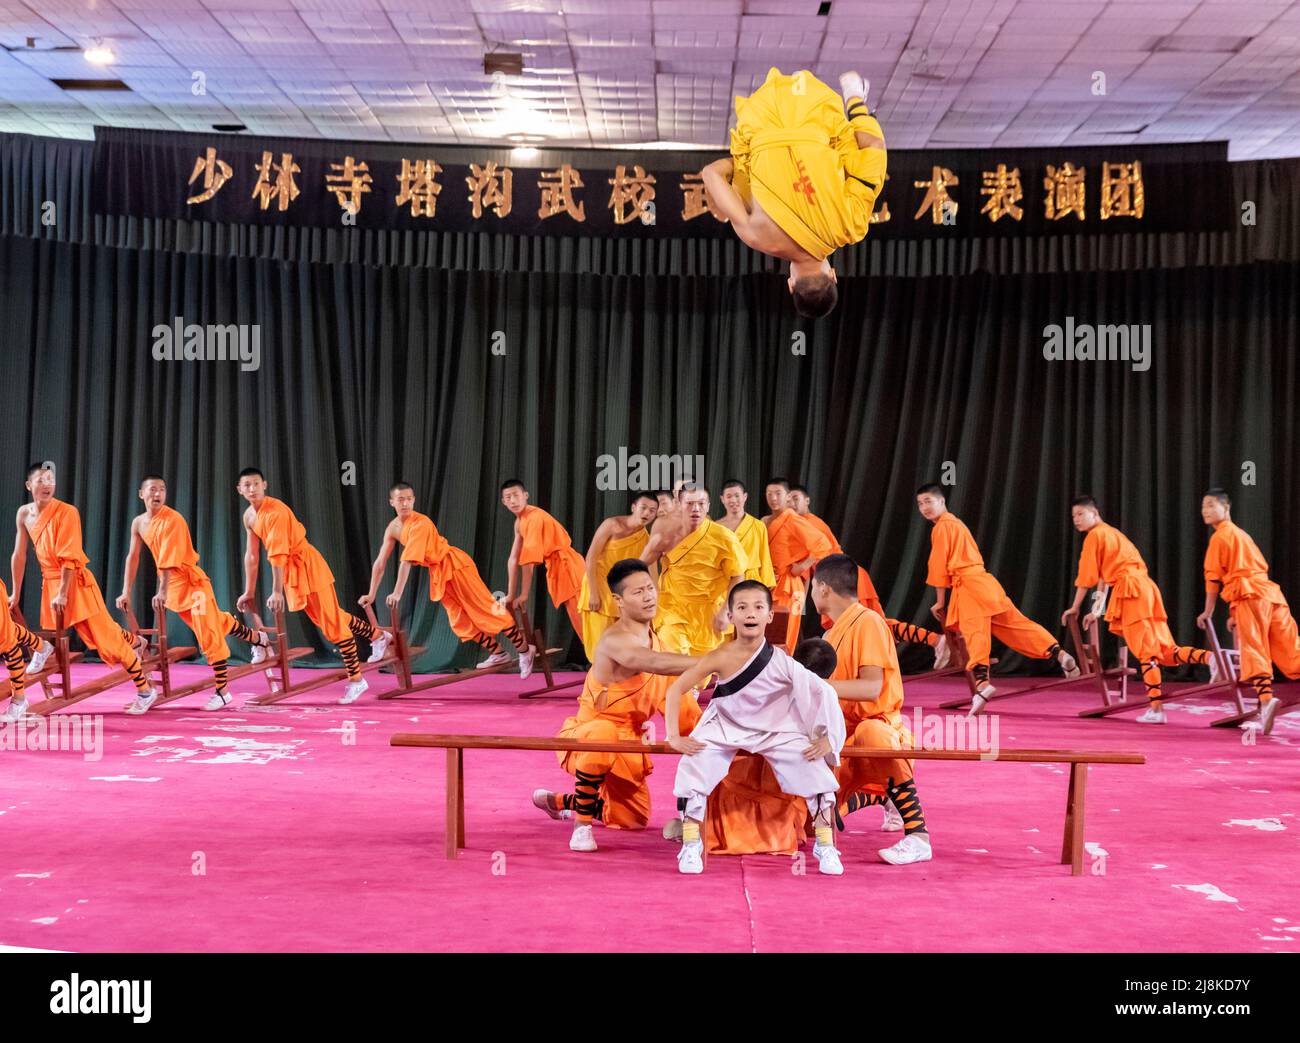 Apprentices at the famous Shaolin Temple at Dengfeng, Henan, China perform their martial arts and acrobatic skills. Stock Photo